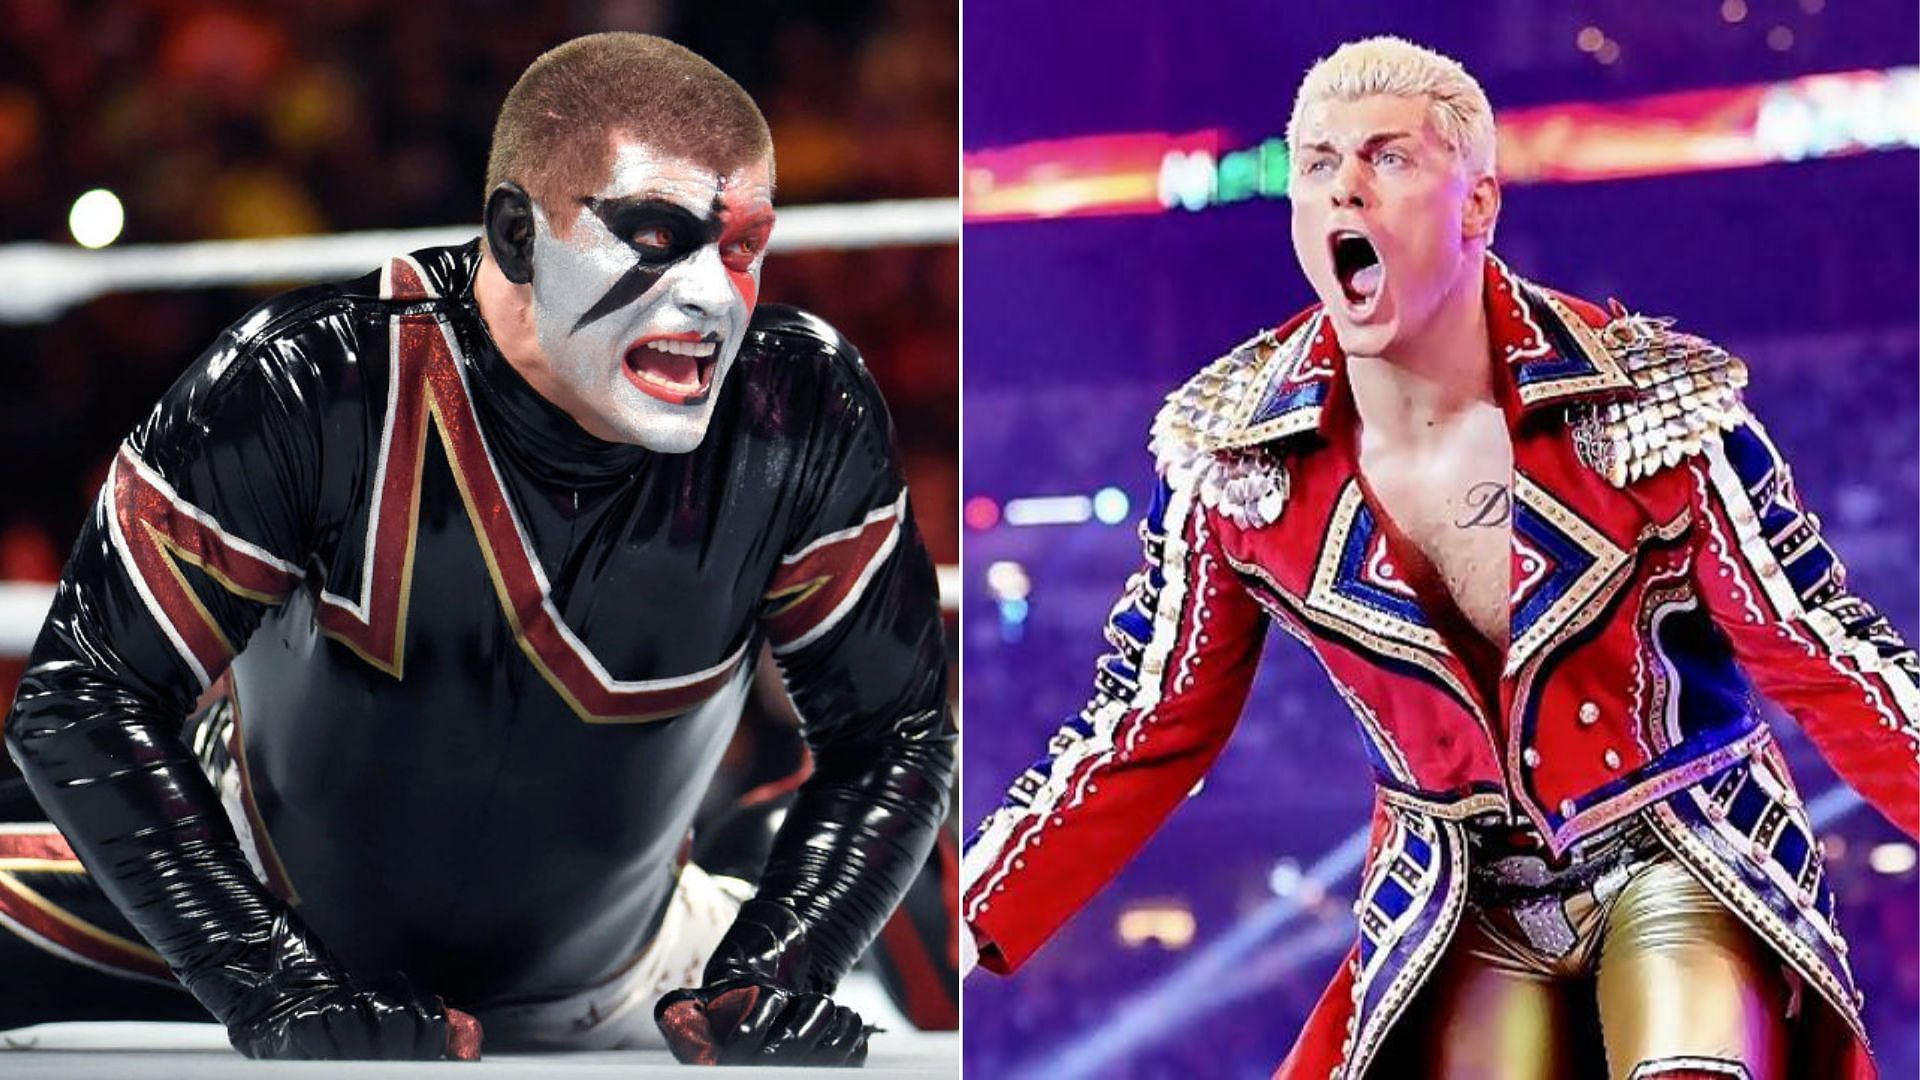 Cody Rhodes has come a long way from the time when he was Stardust